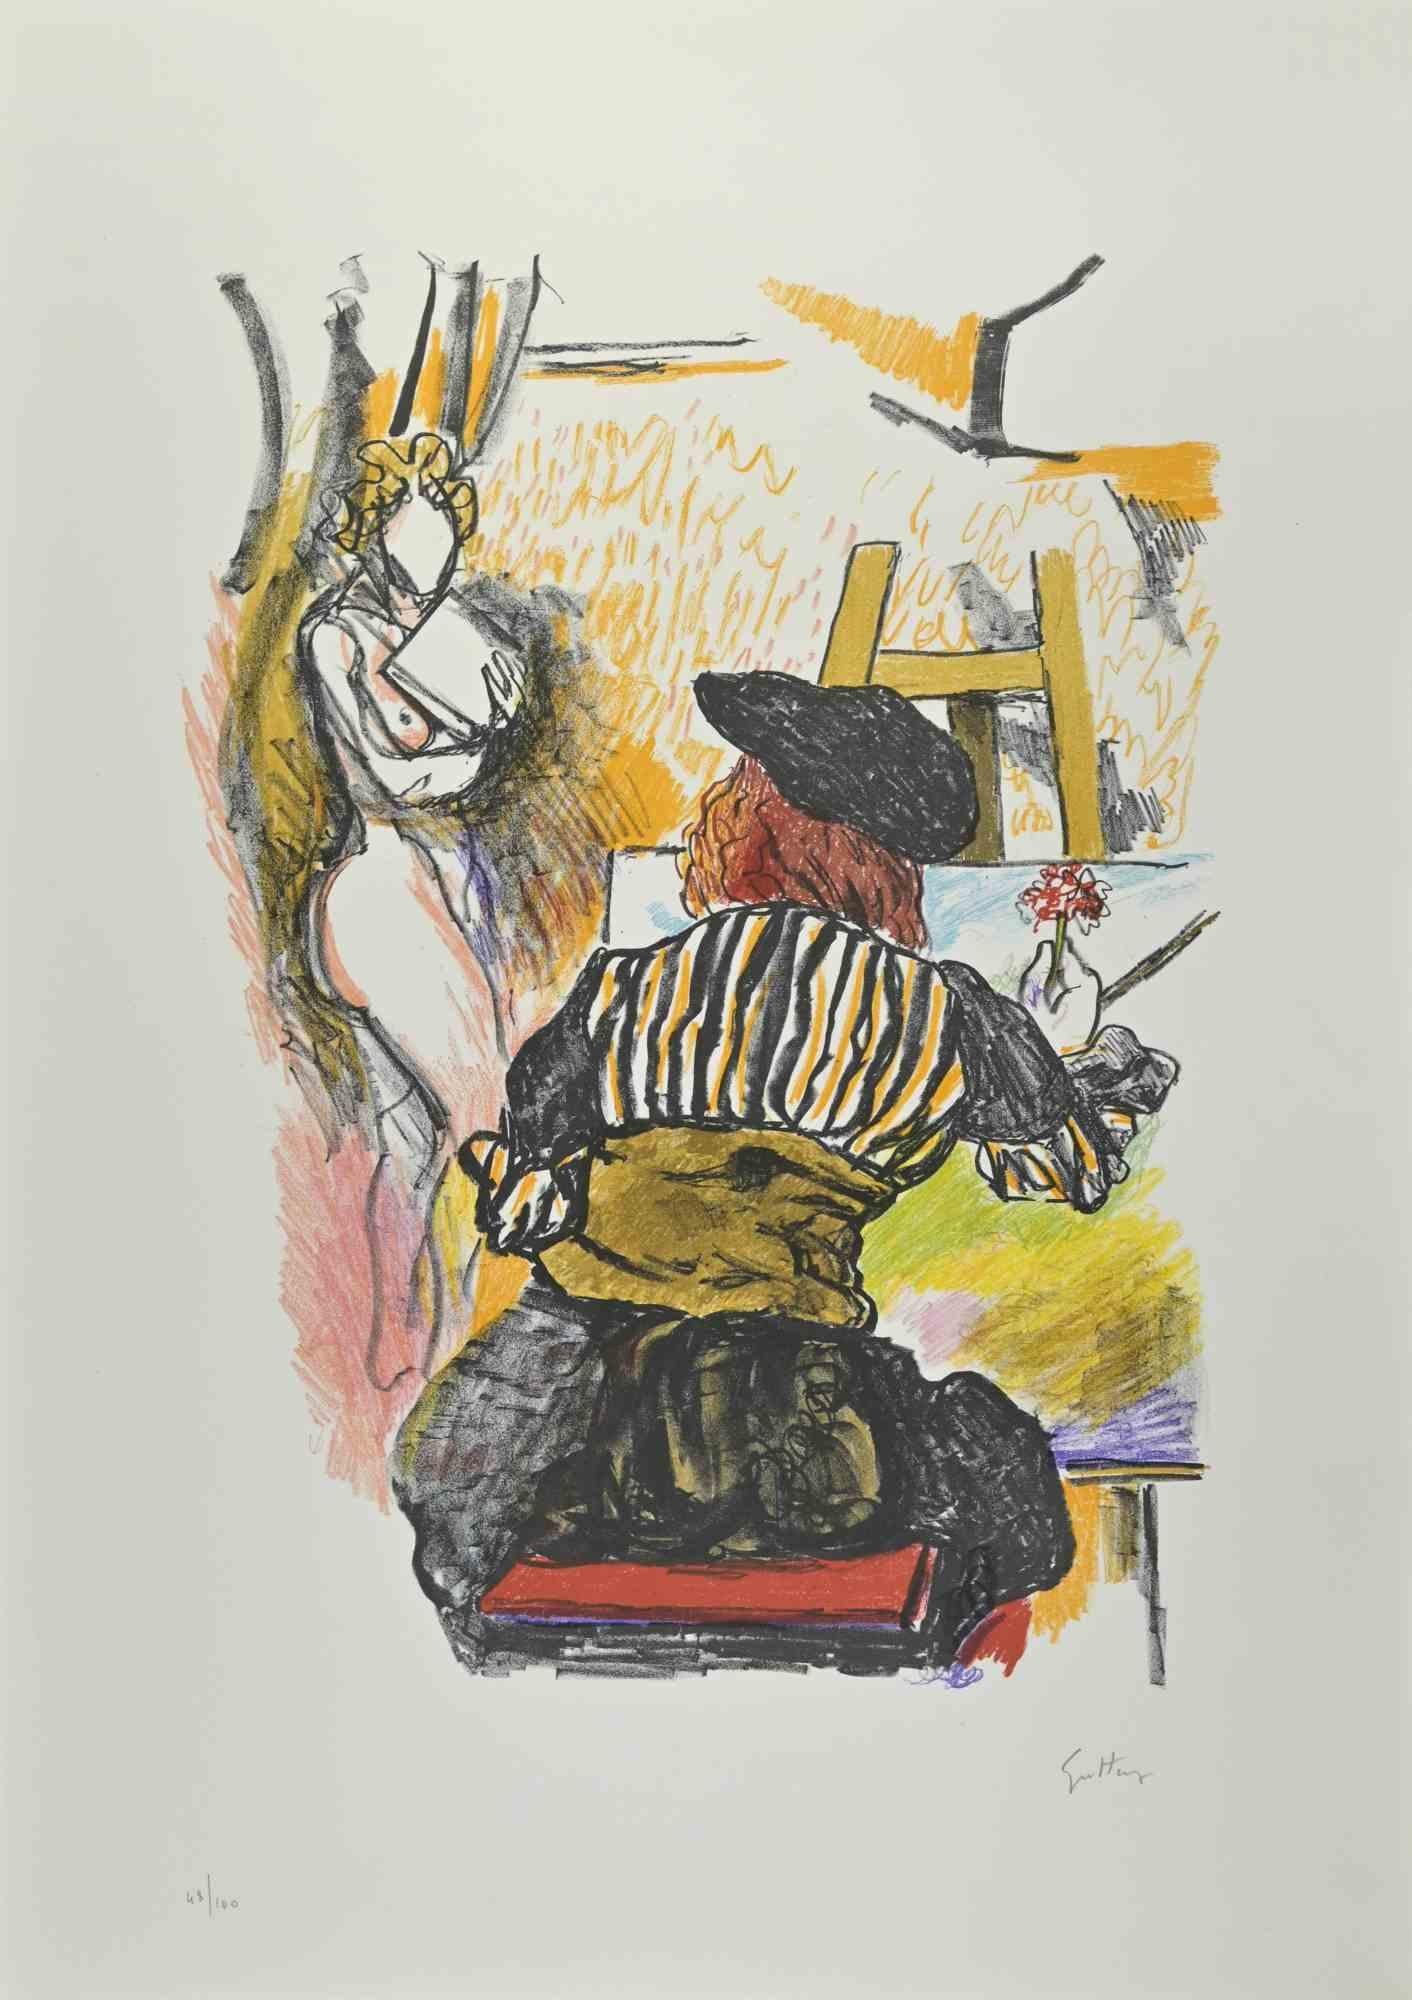 Hommage to Jan Vermeer is a lithograph realized by Renato Guttuso in 1980.

Hand-signed on the lower.

Numbered, edition of 100.

Drystamp "La Spirale".